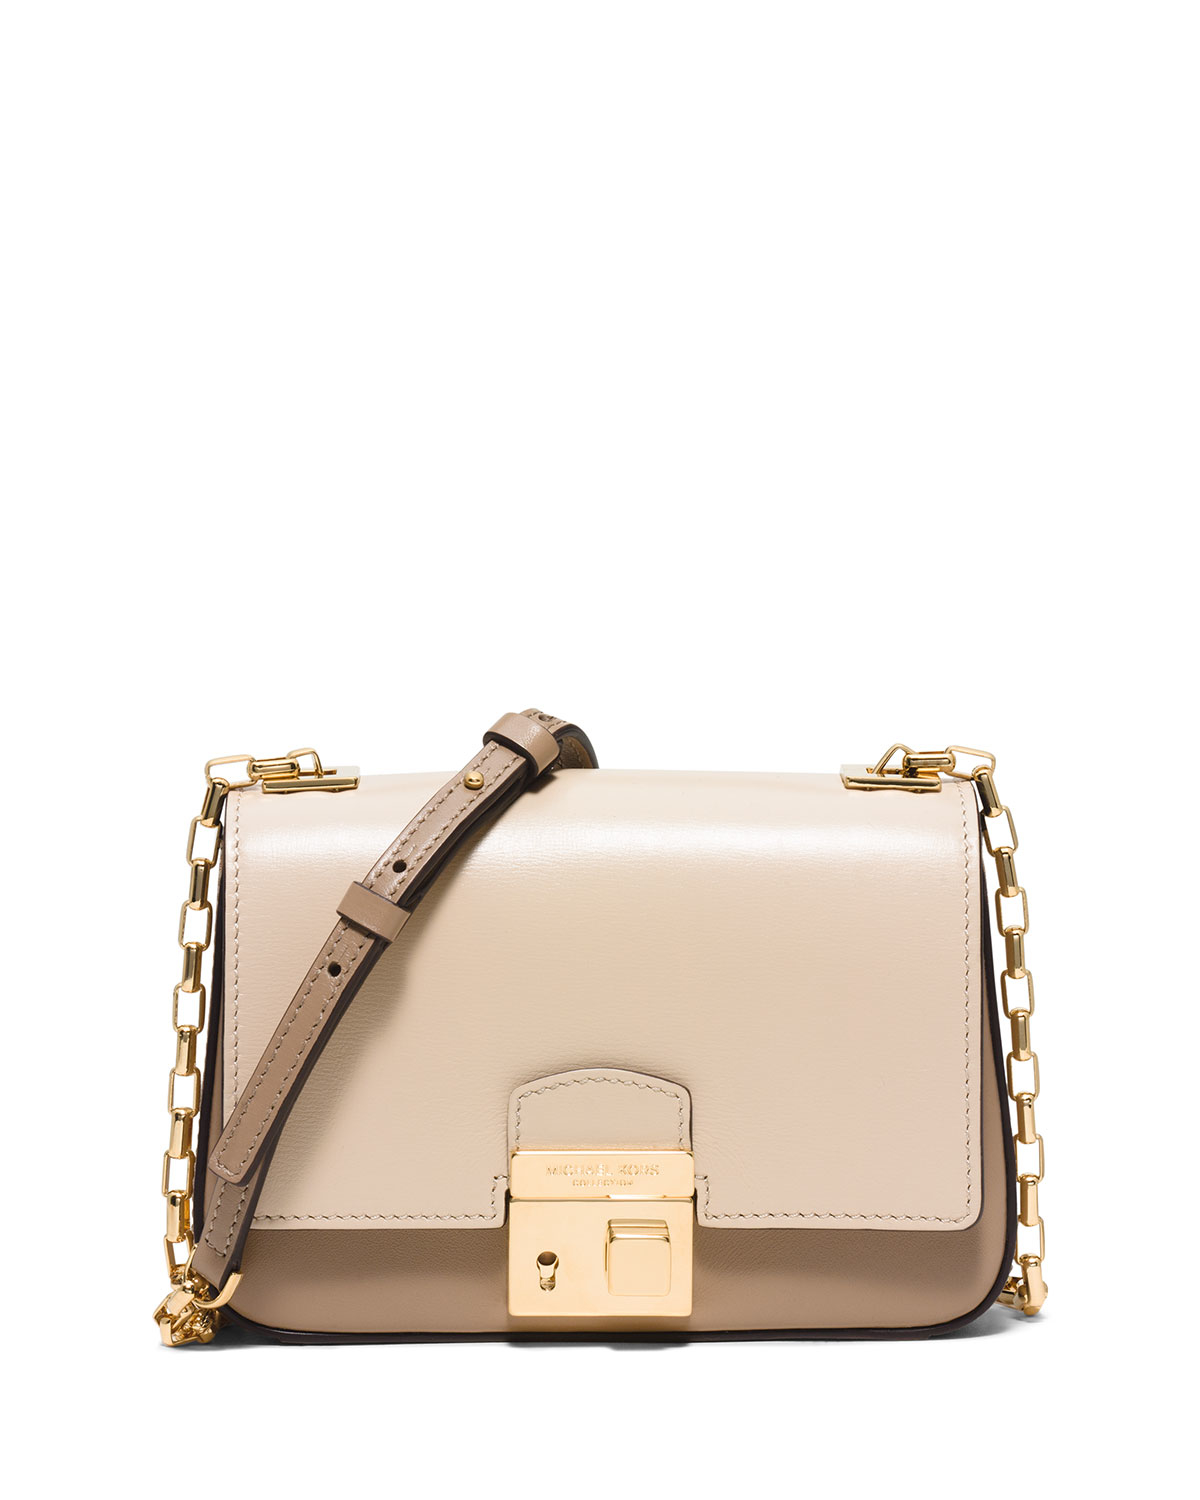 Michael kors Gia Small Chain-Strap Shoulder Bag in Natural | Lyst